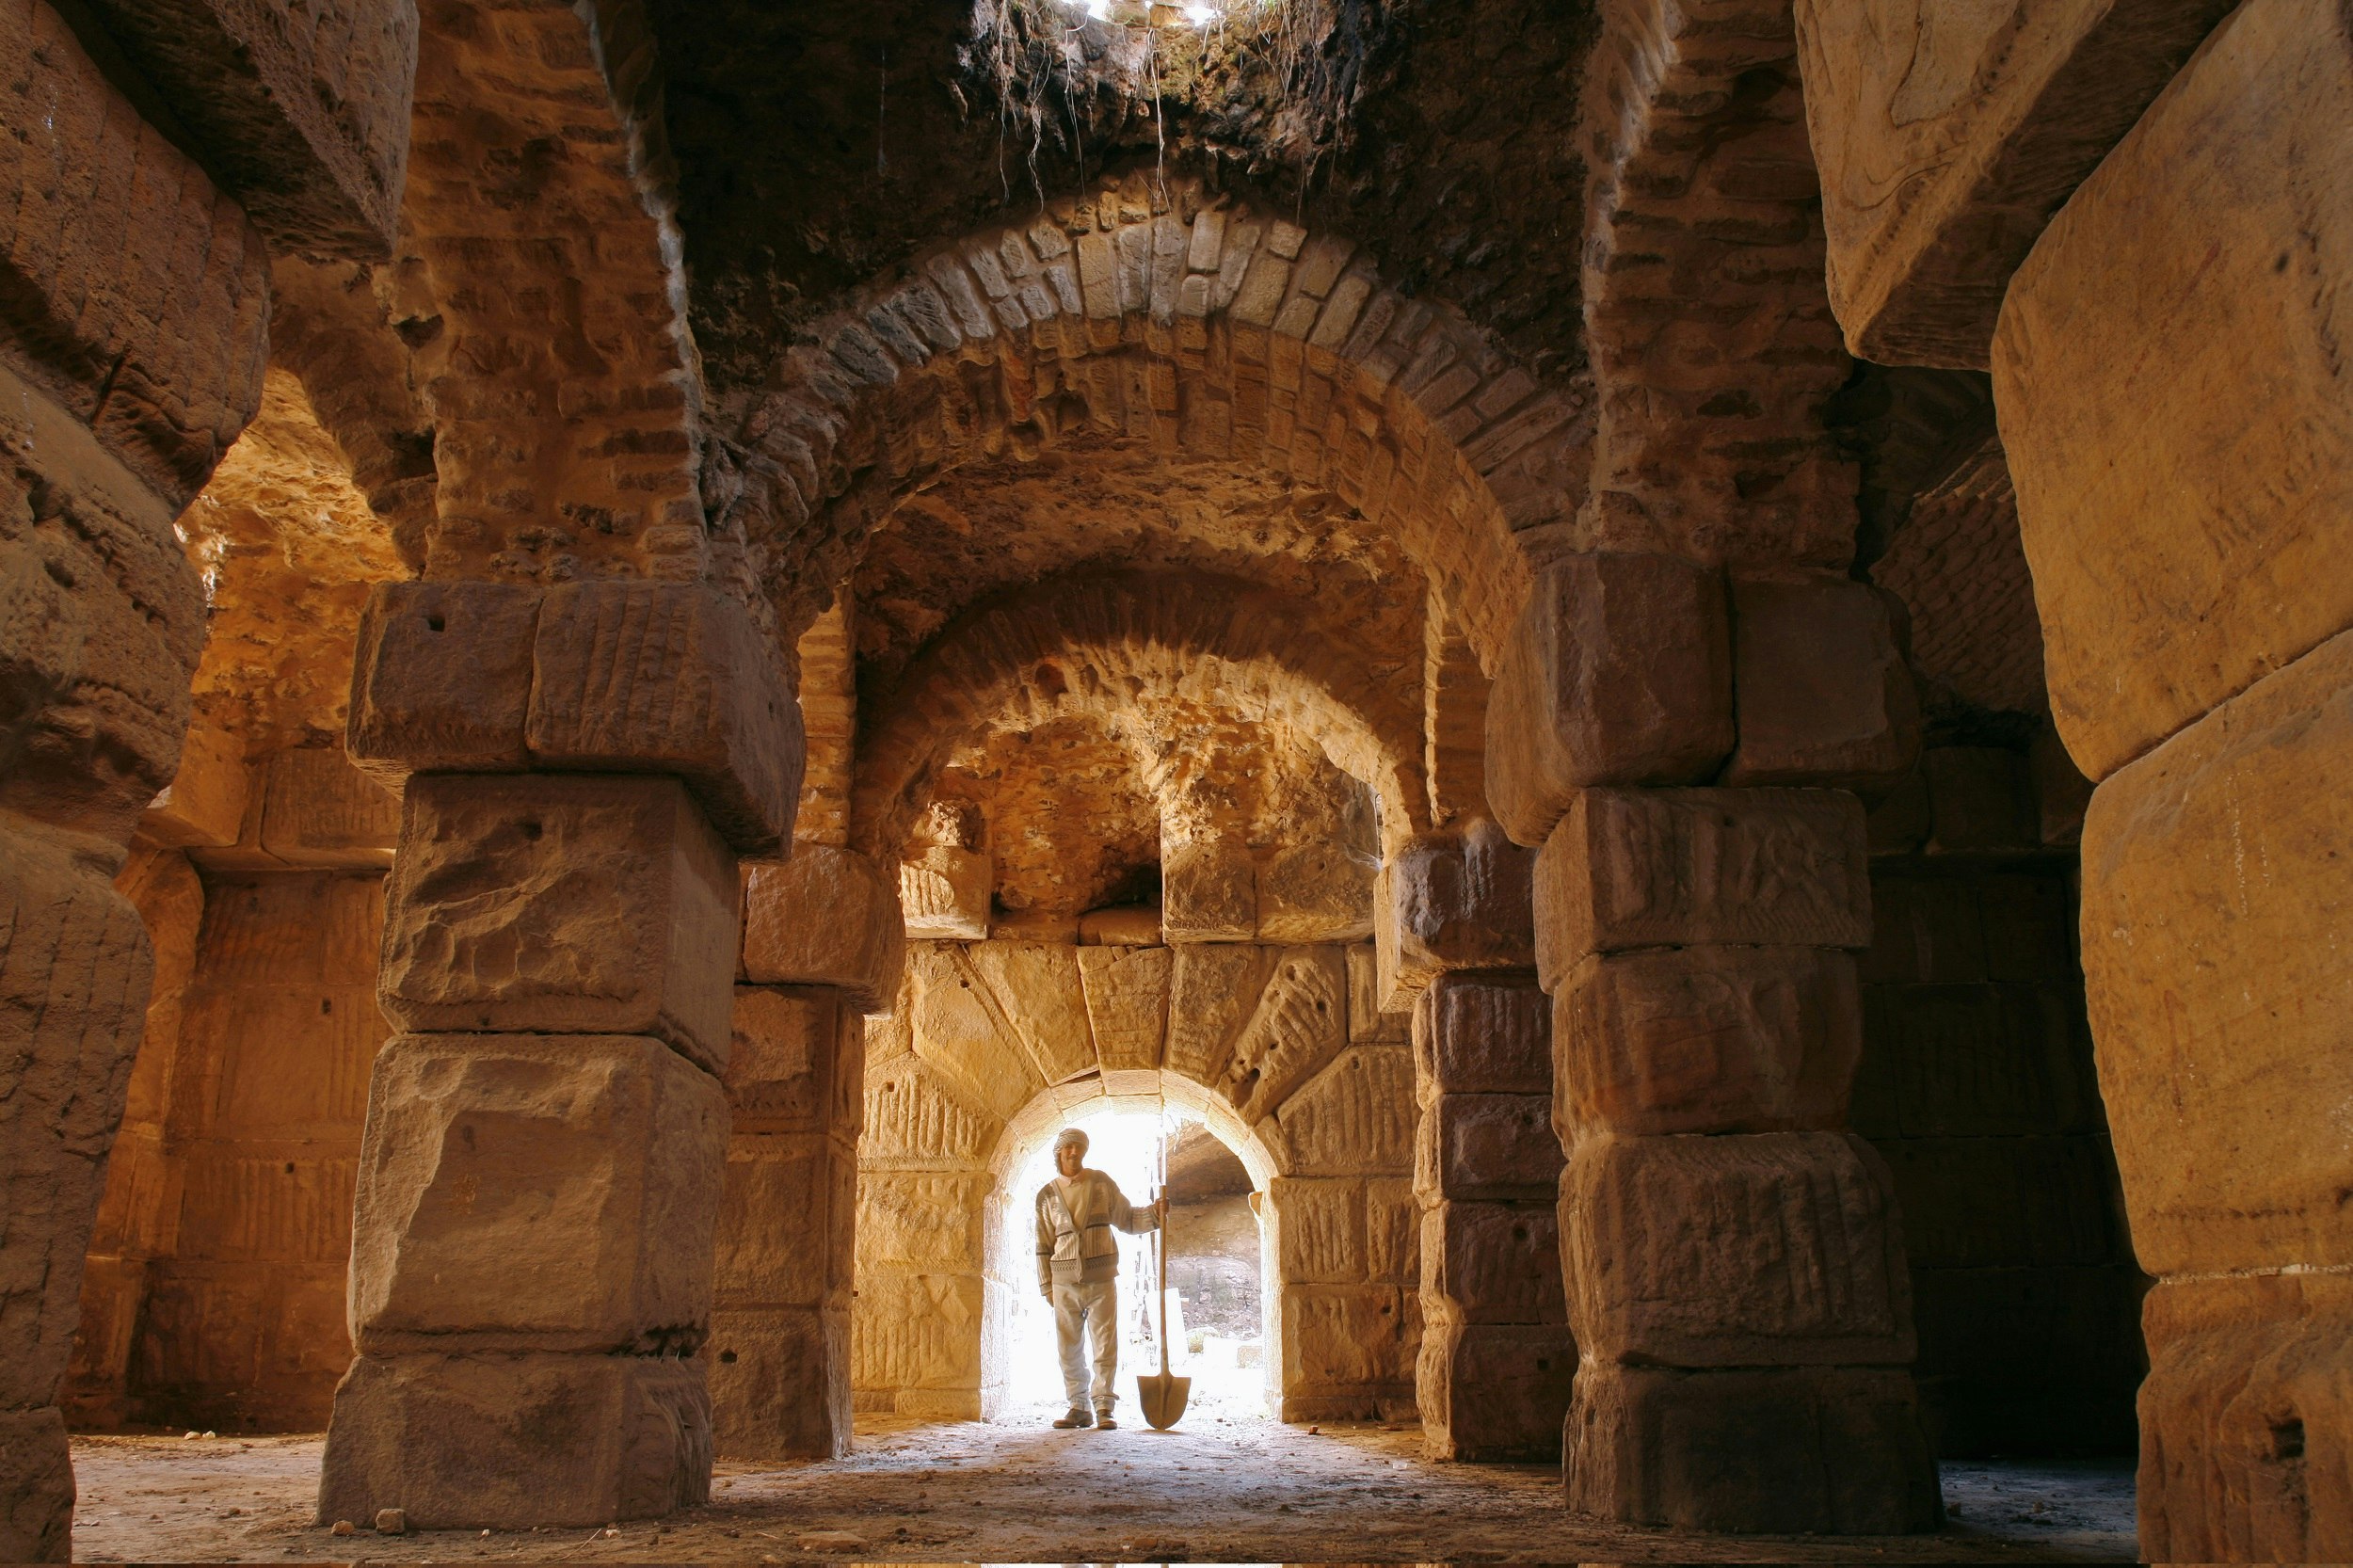 A Tunisian man stands holding a shovel at the end of a subterranean catacomb; the inside is constructed of huge, but roughly-hewn stones and brick arches. 